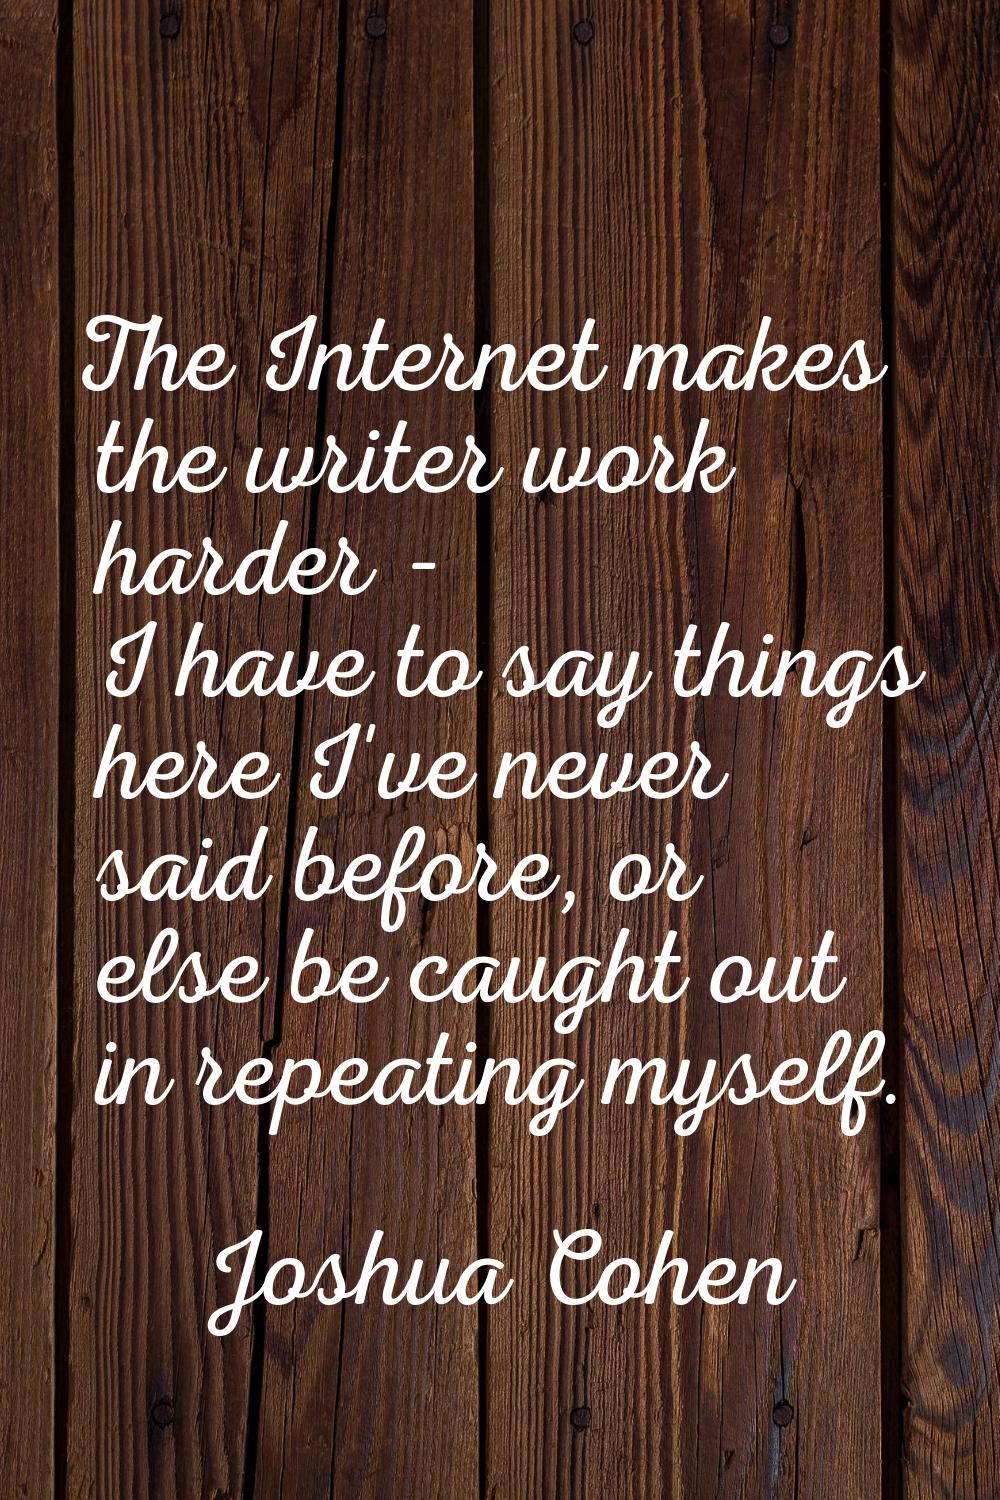 The Internet makes the writer work harder - I have to say things here I've never said before, or el